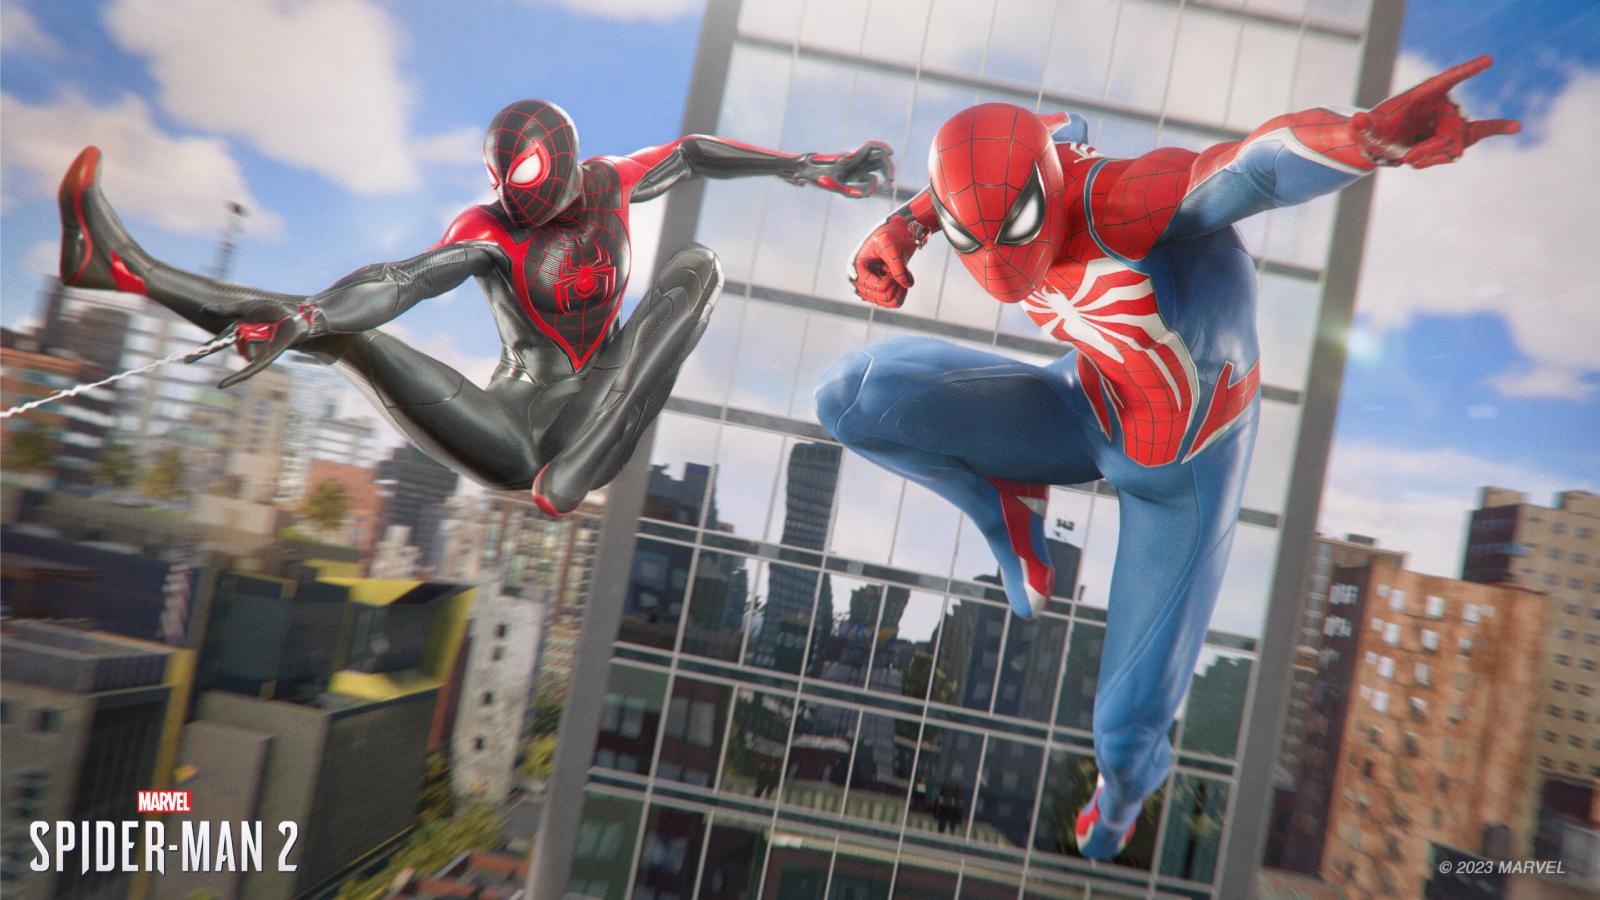 Peak spider-man game, change my mind! Also who wants this game